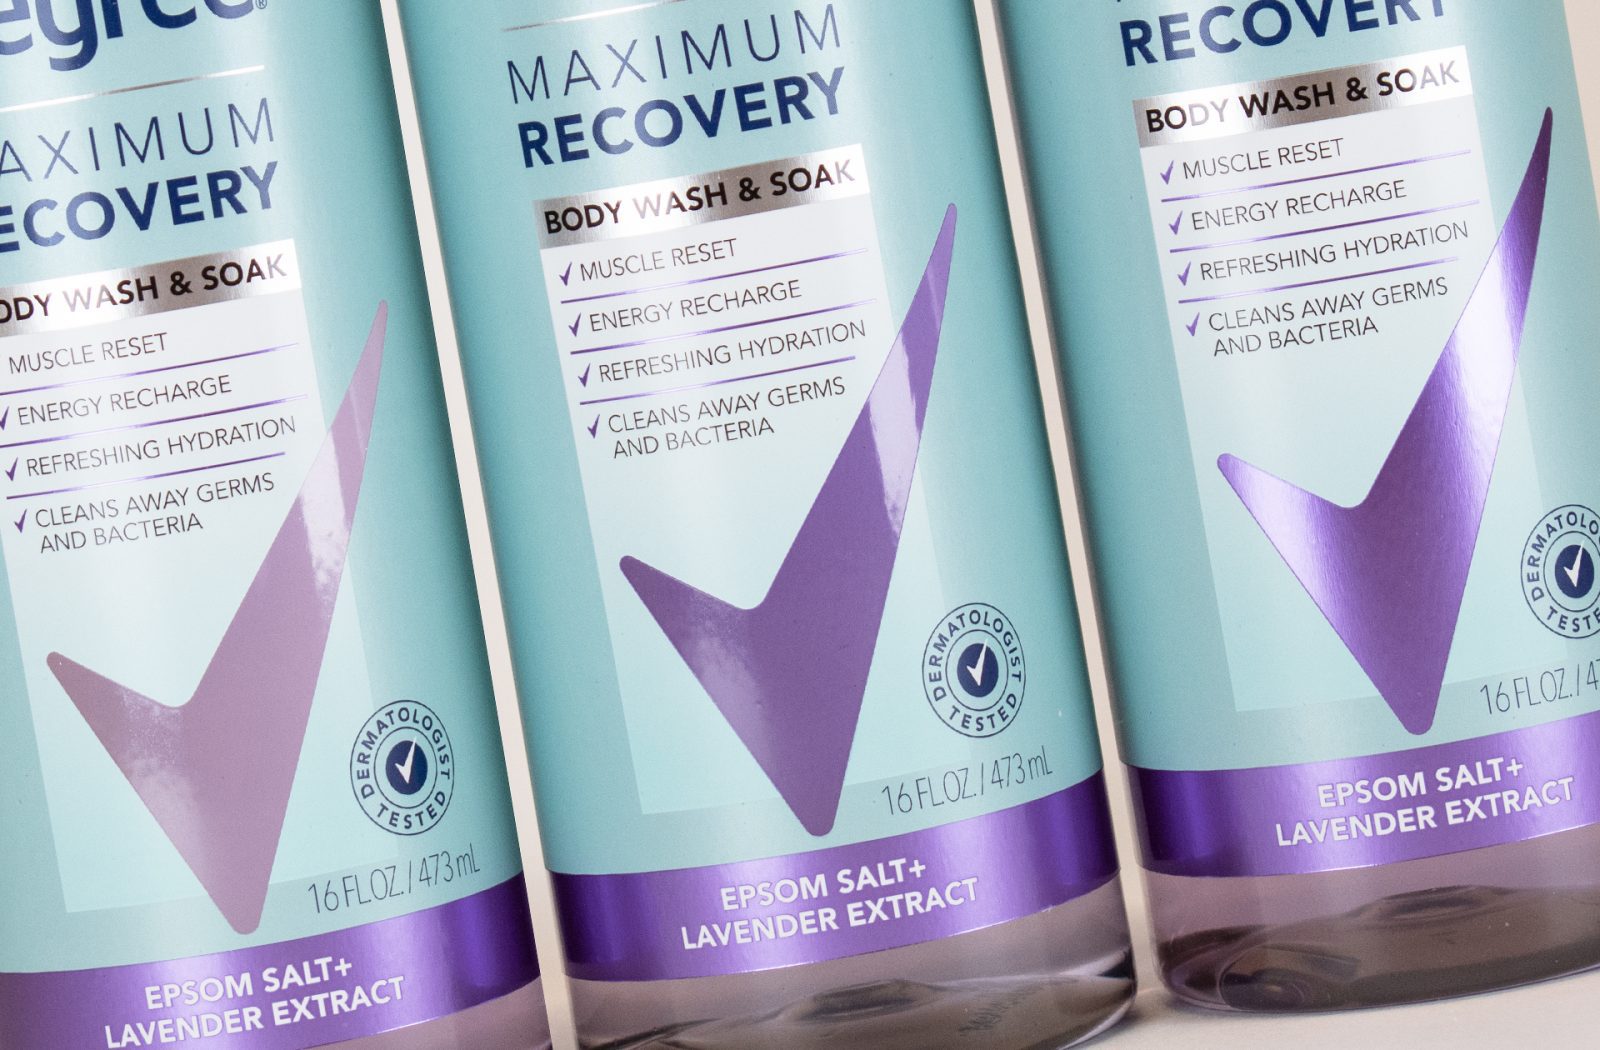 Photograph of three comps developed for a product line extension for Degree Maximum Recovery Body Wash, featuring metallic effects and a reimagined use of the brandmark.